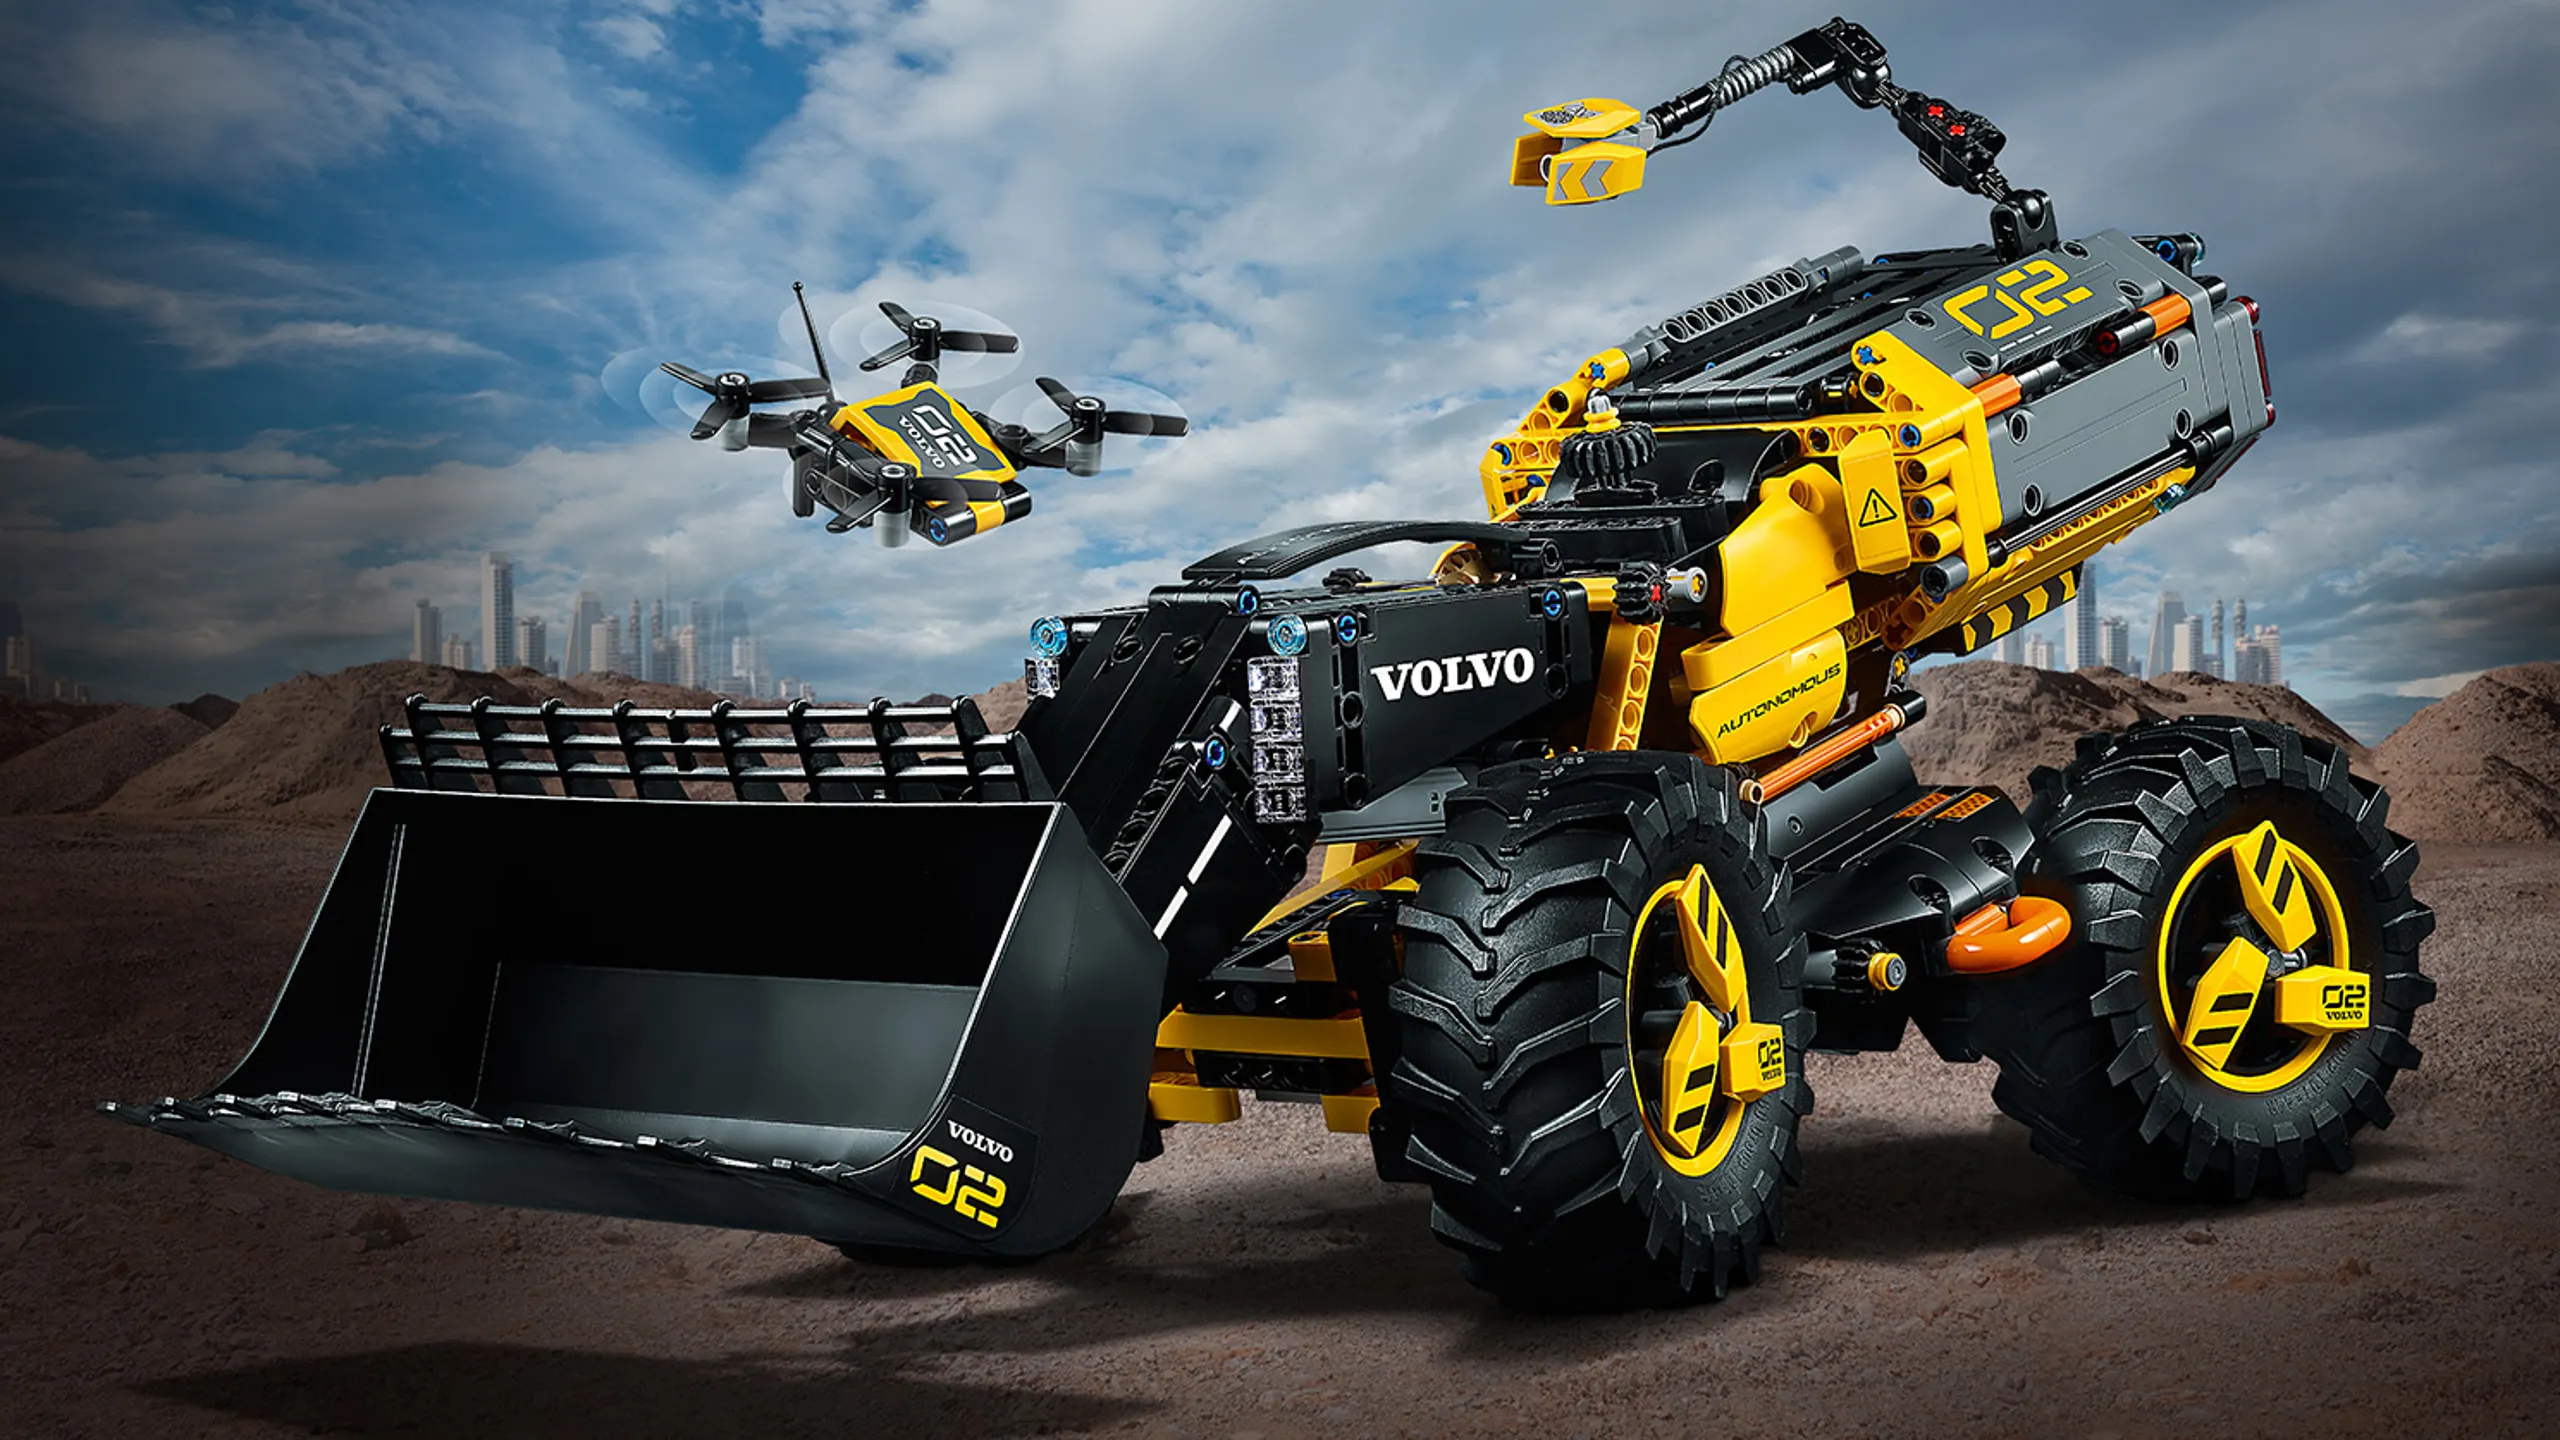 LEGO Technic - 42081 Volvo Concept Wheel Loader ZEUX - This detail-packed, futuristic, black and yellow Wheel Loader is designed in collaboration with Volvo and also includes a flying drone model.